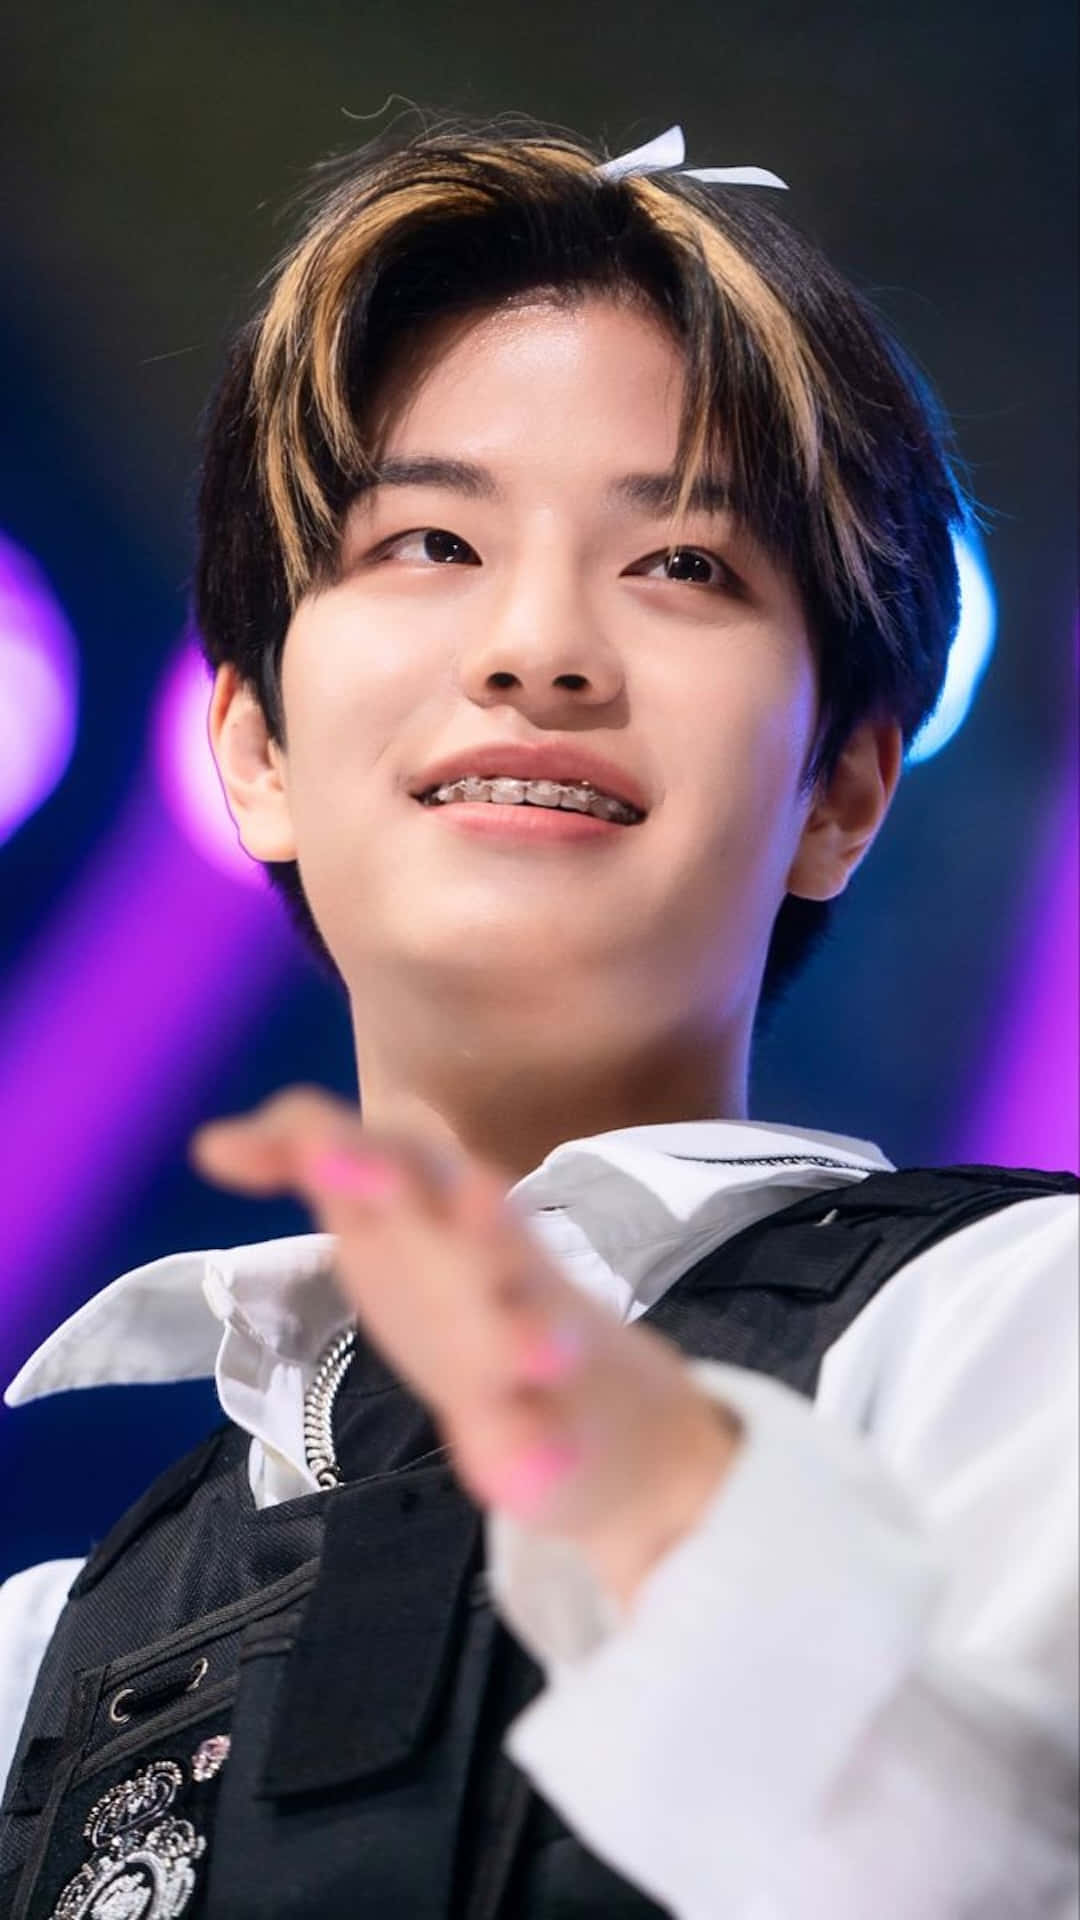 Smiling Young Man Stage Performance Wallpaper